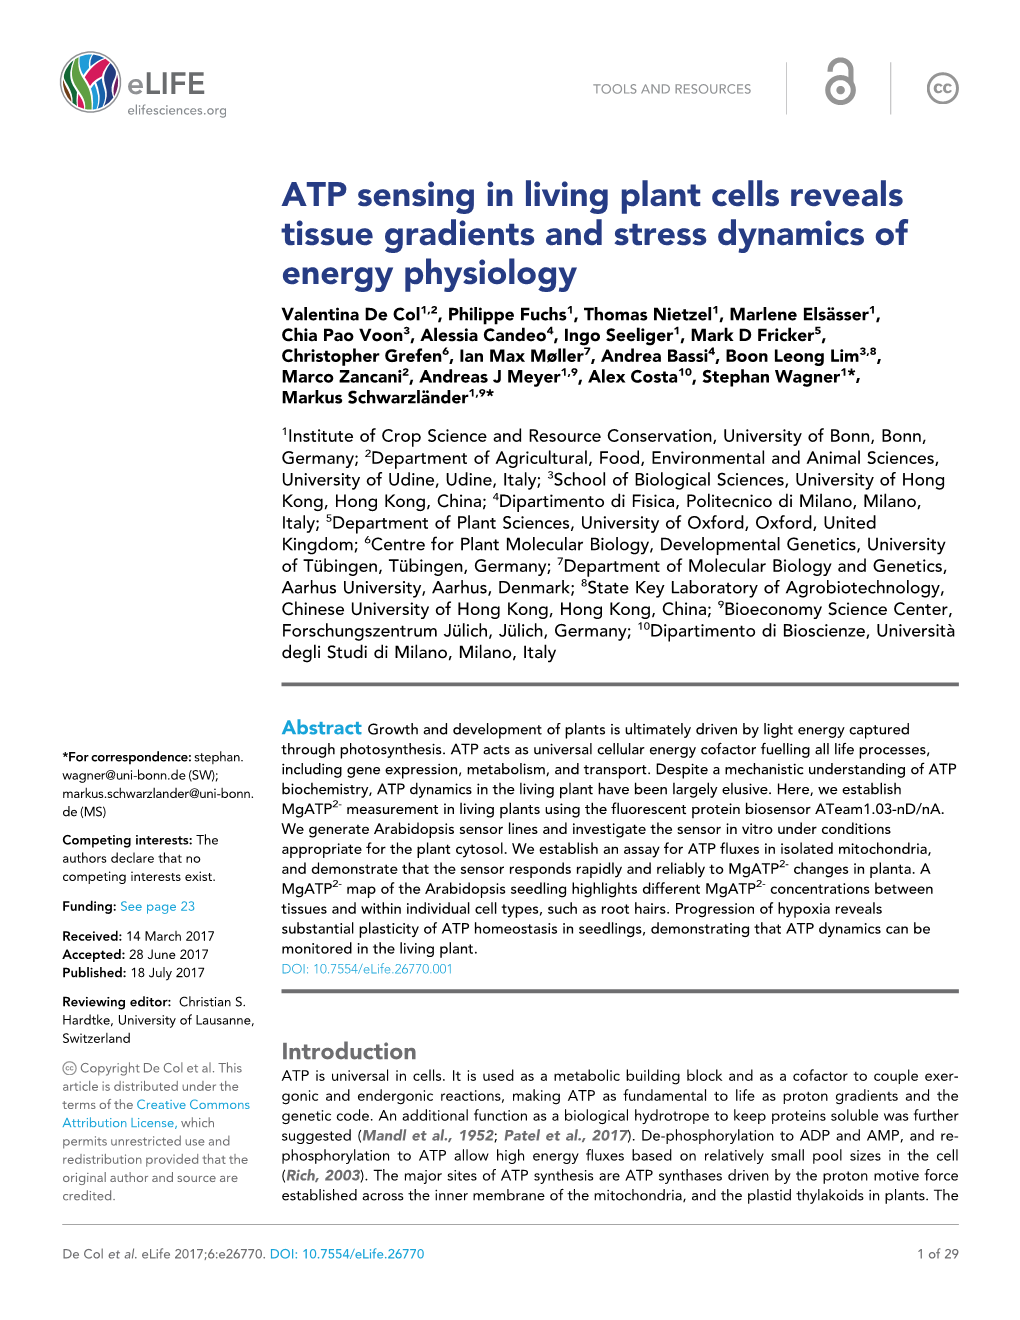 ATP Sensing in Living Plant Cells Reveals Tissue Gradients and Stress